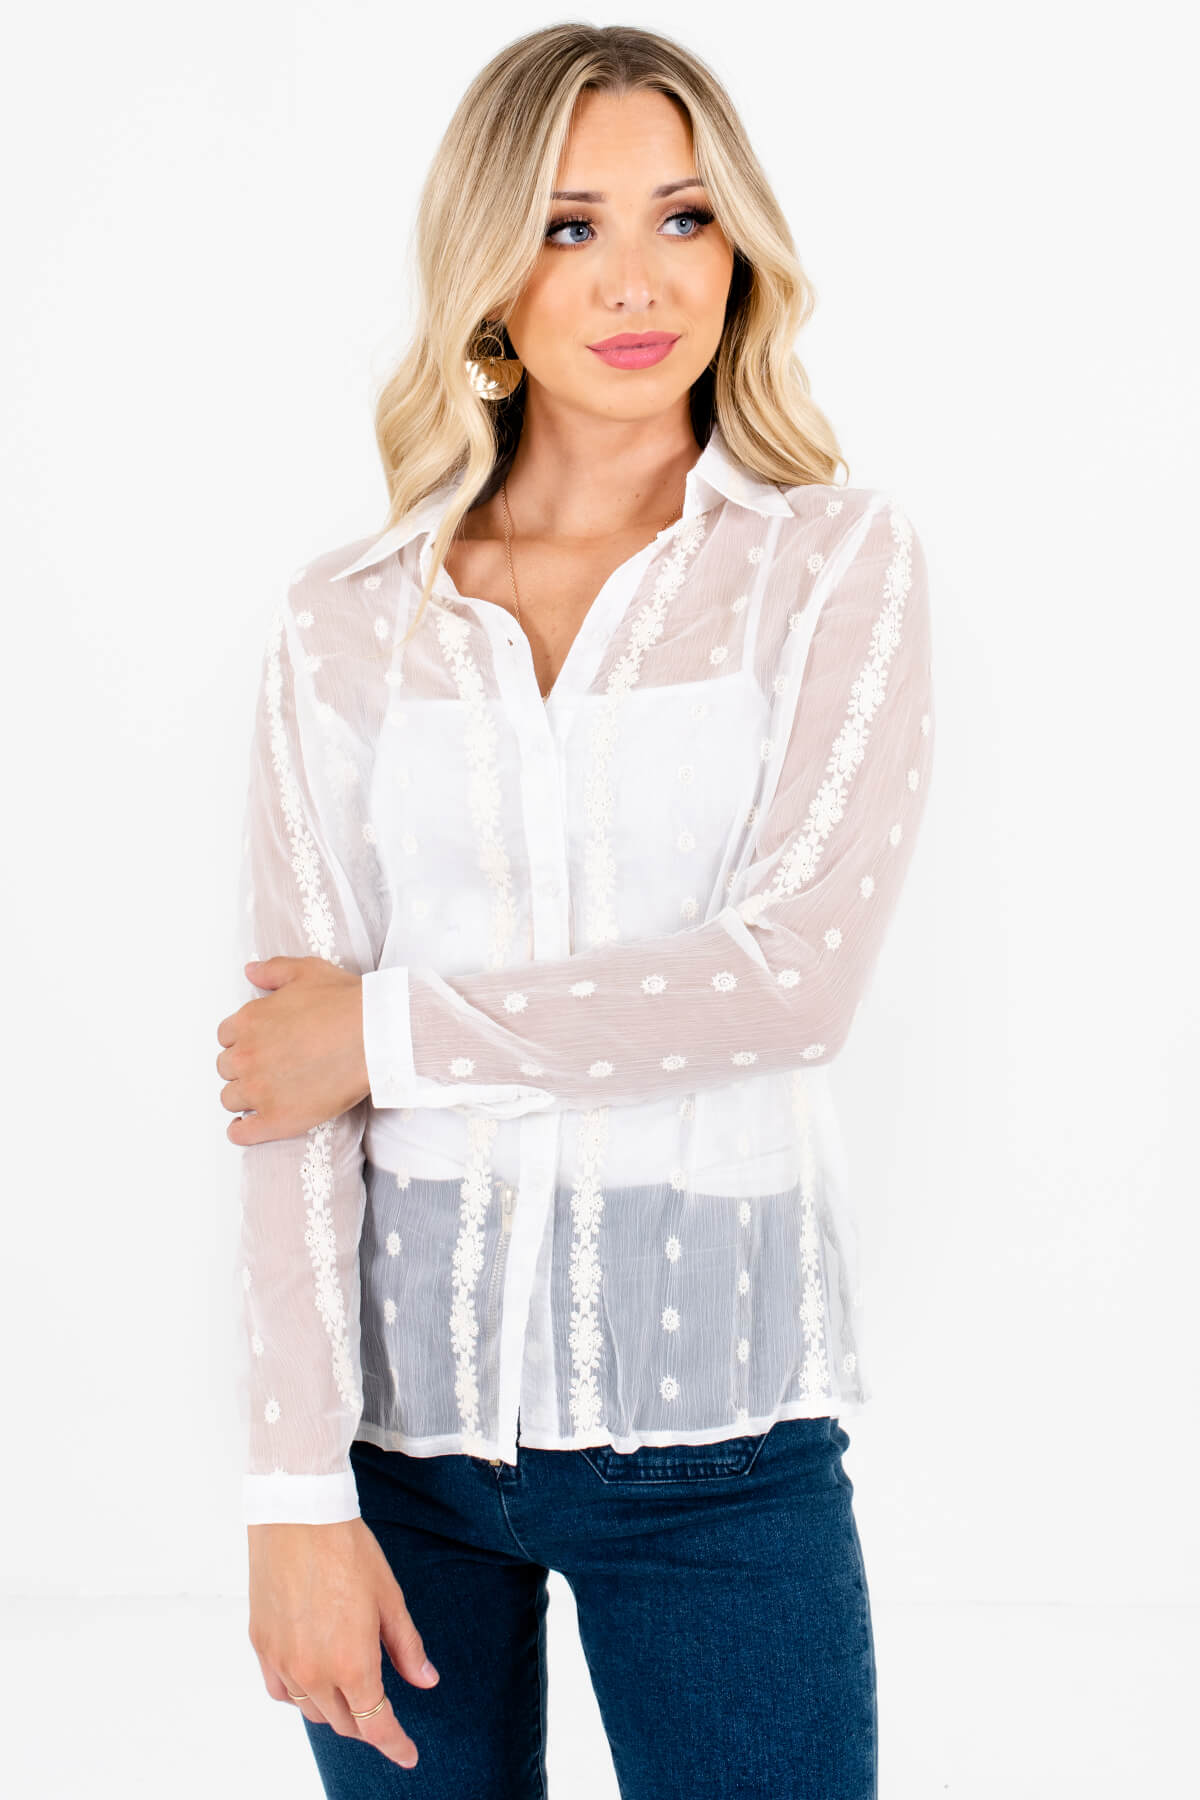 White Sheer Embroidered Button-Up Shirts Affordable Online Boutique